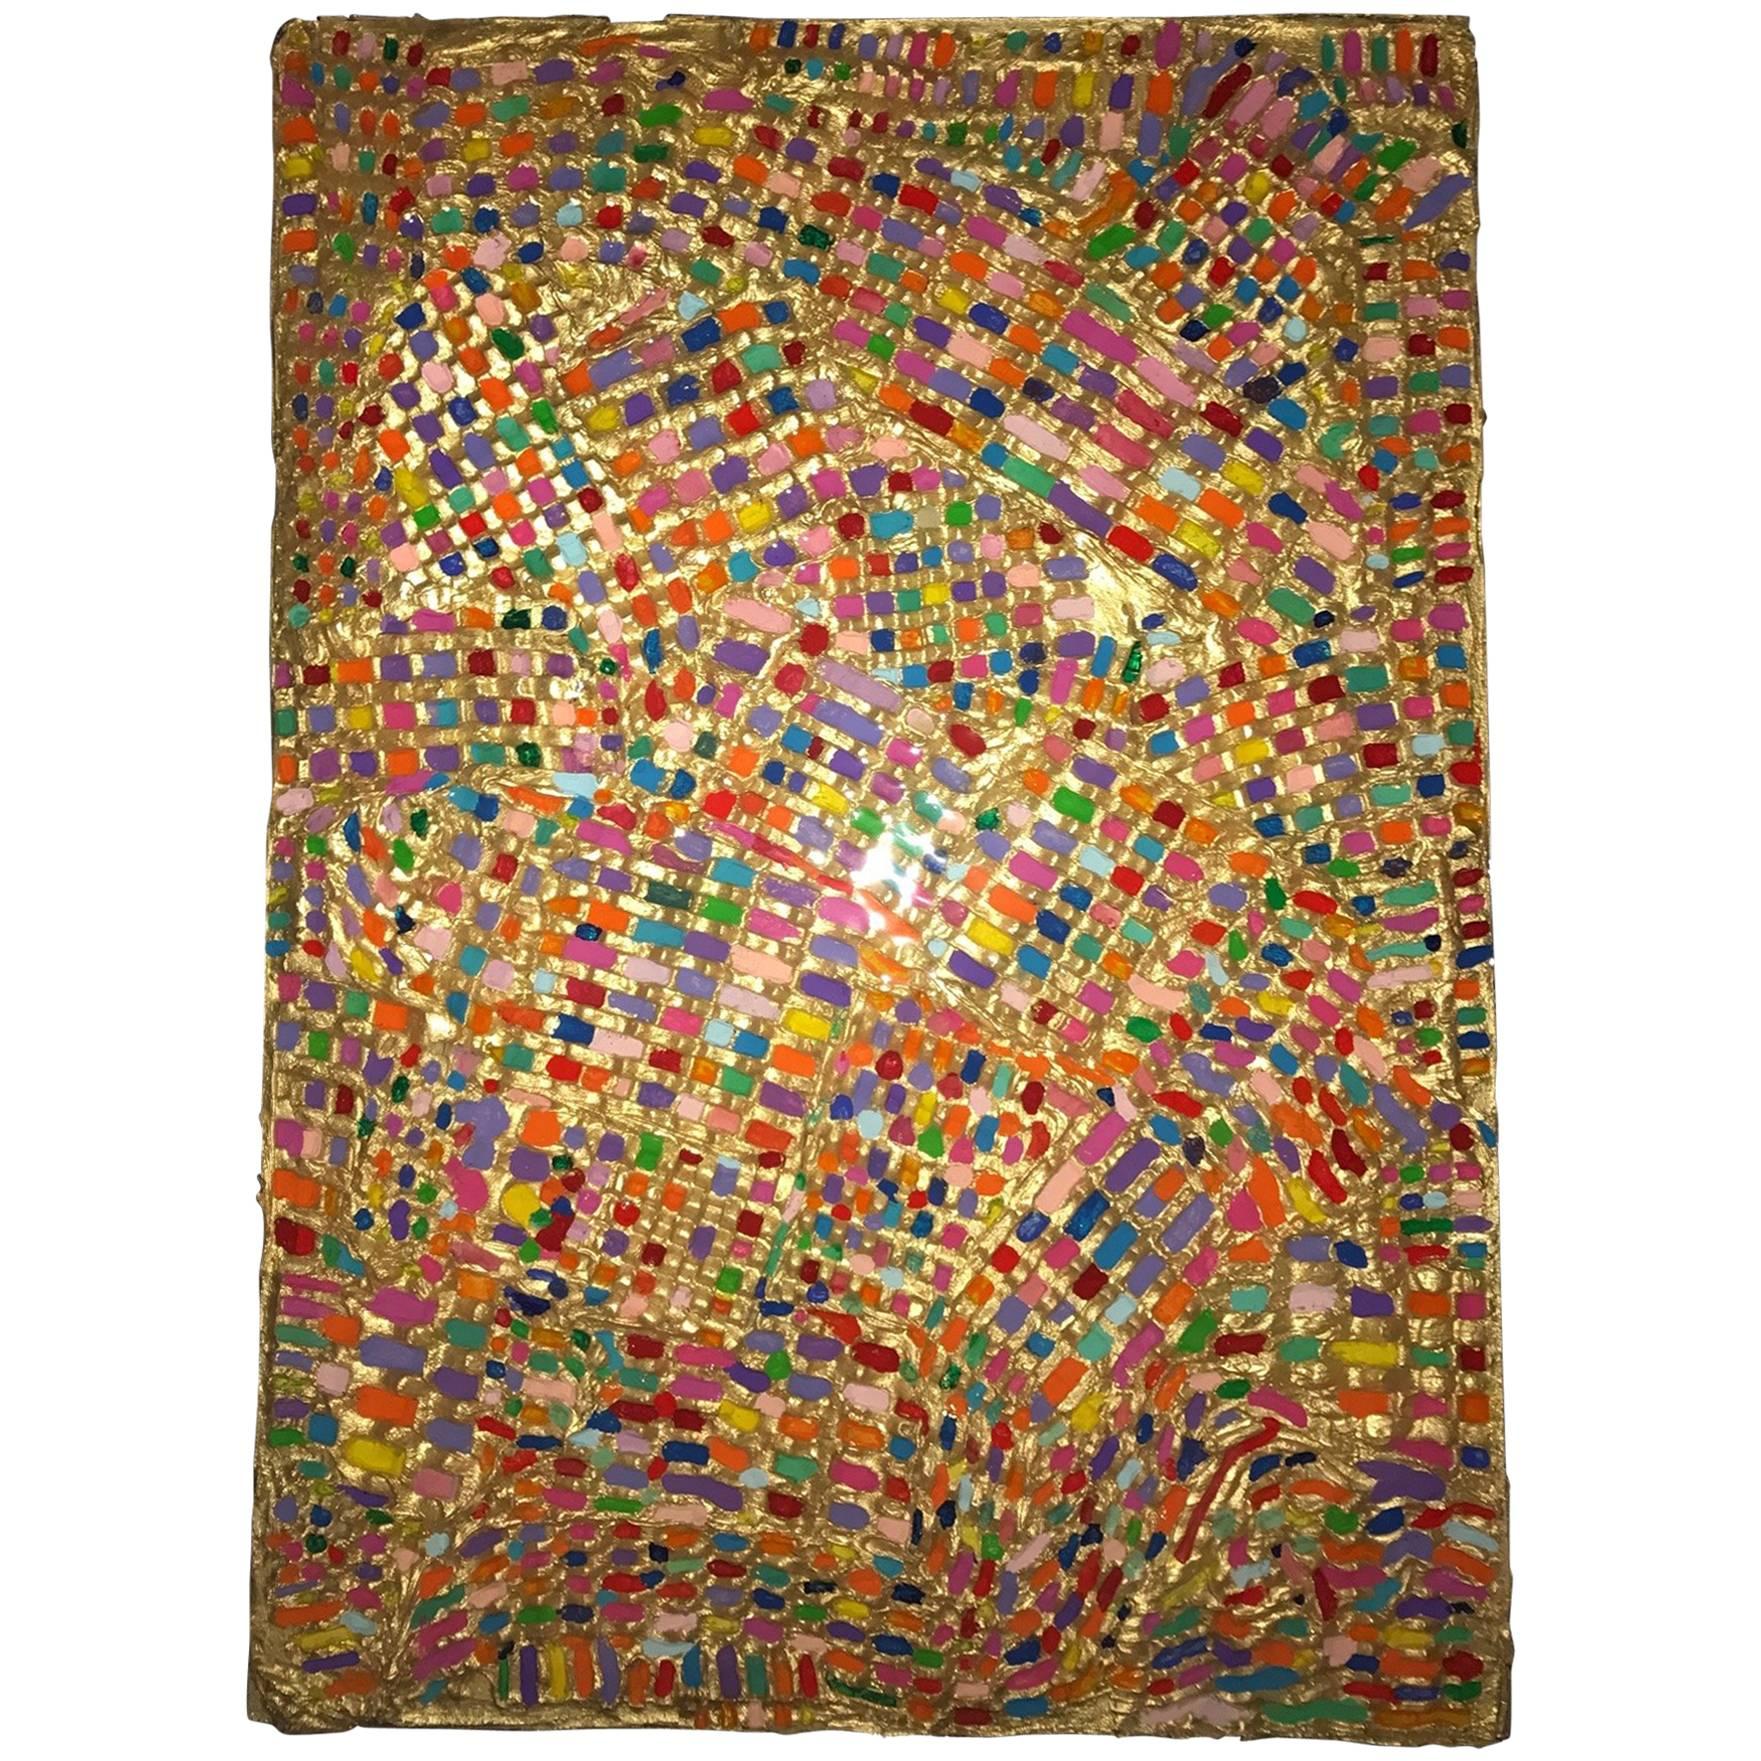 "Thousand and One Nights" Painting with Plastic Technique, Erika Baktay For Sale